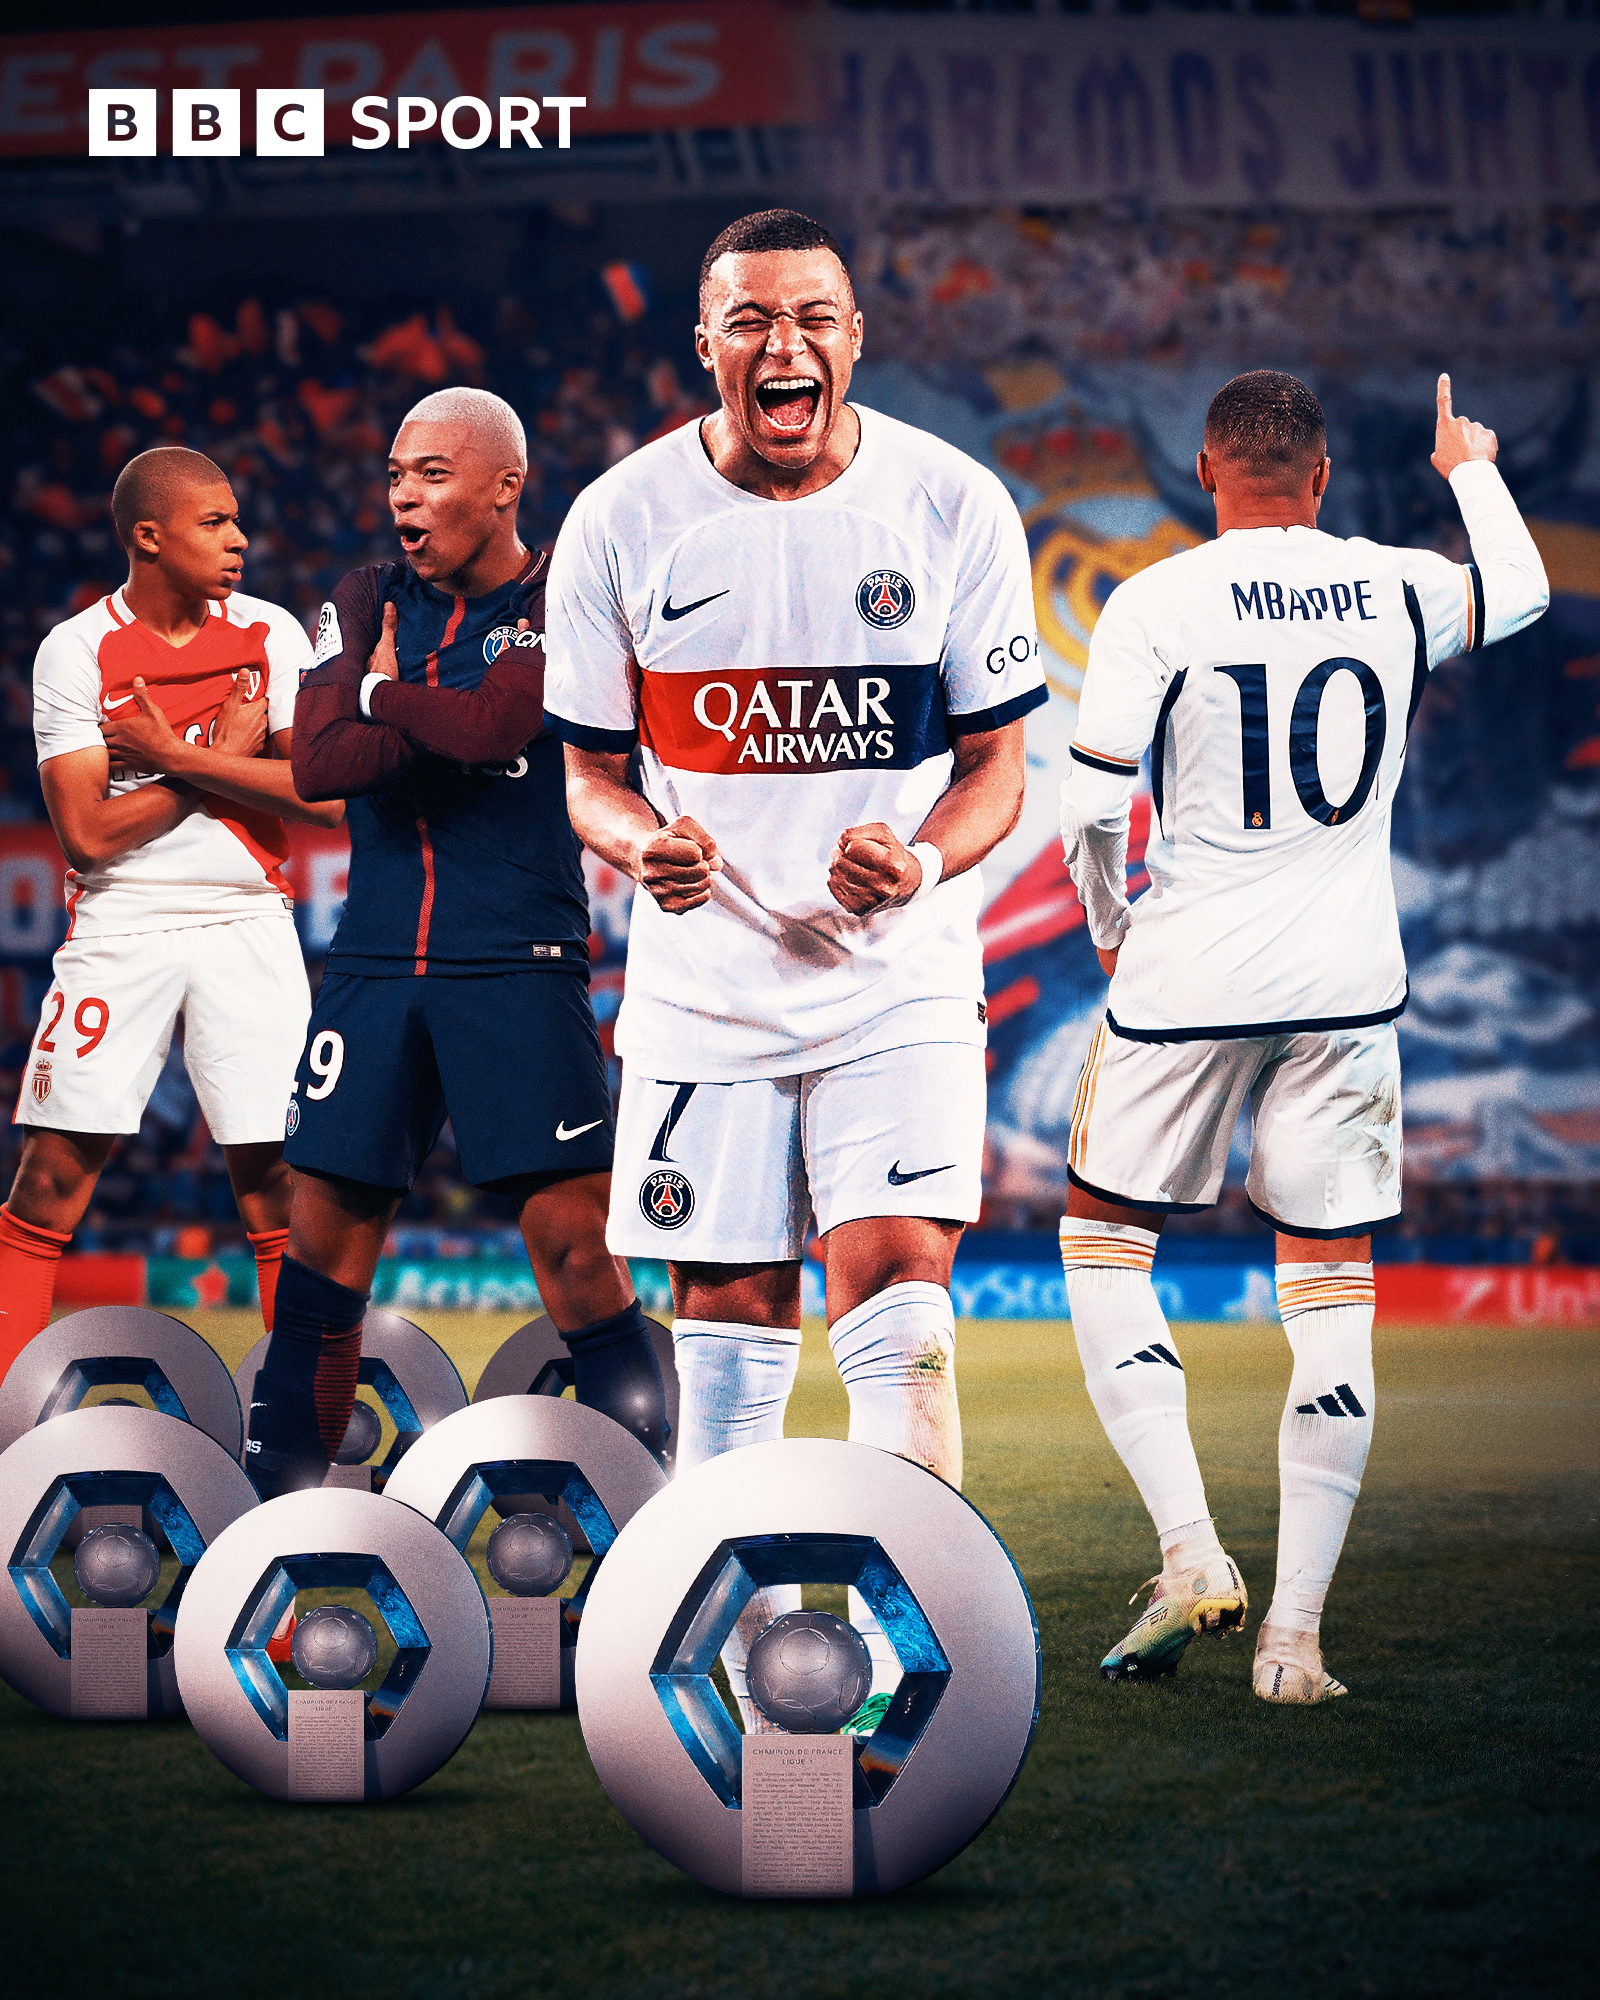 BBC Sport on X: "PSG have just won a record-extending 12th Ligue 1 title  and Kylian Mbappe has won his seventh  A fitting farewell to PSG before  he leaves for Real